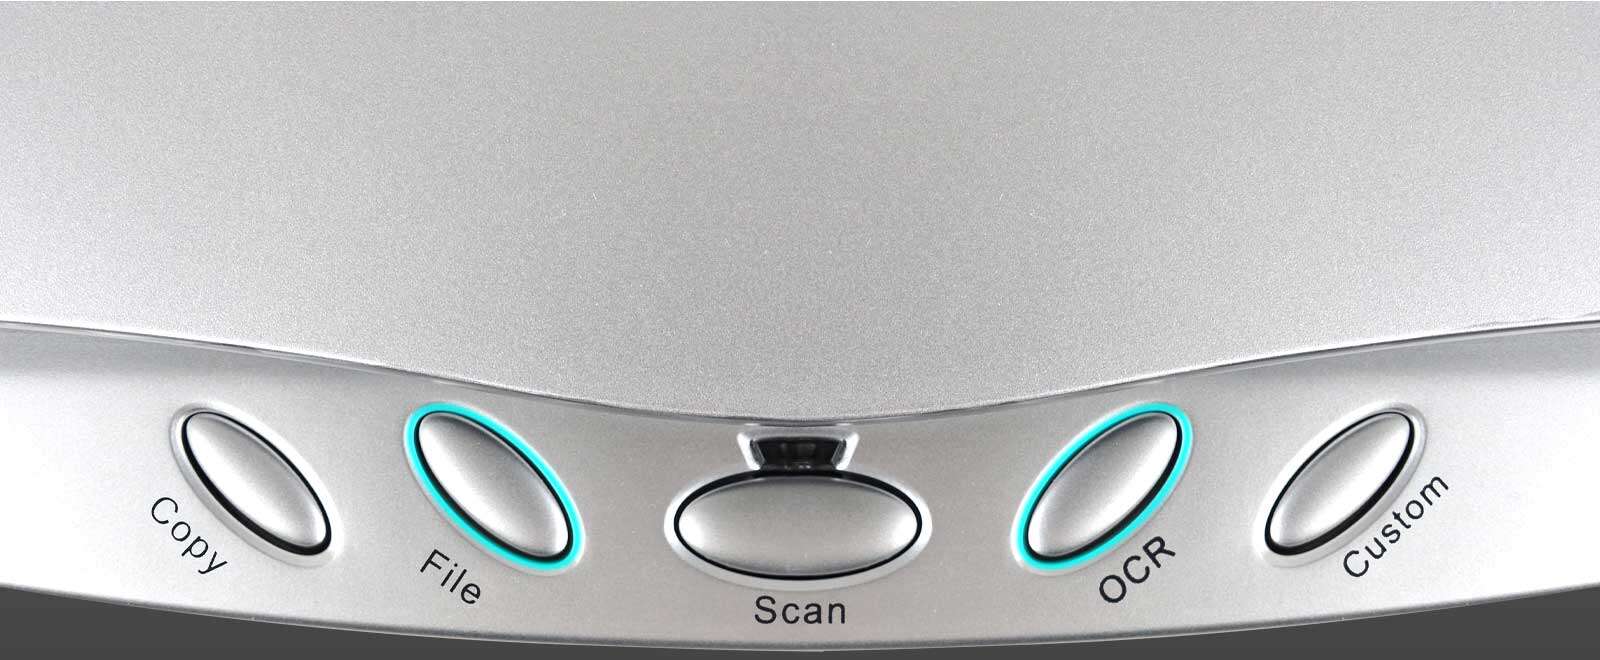 The OpticSlim 550 Plus has five one-touch scan buttons to simplify the whole scanning process and automate the most used functions.